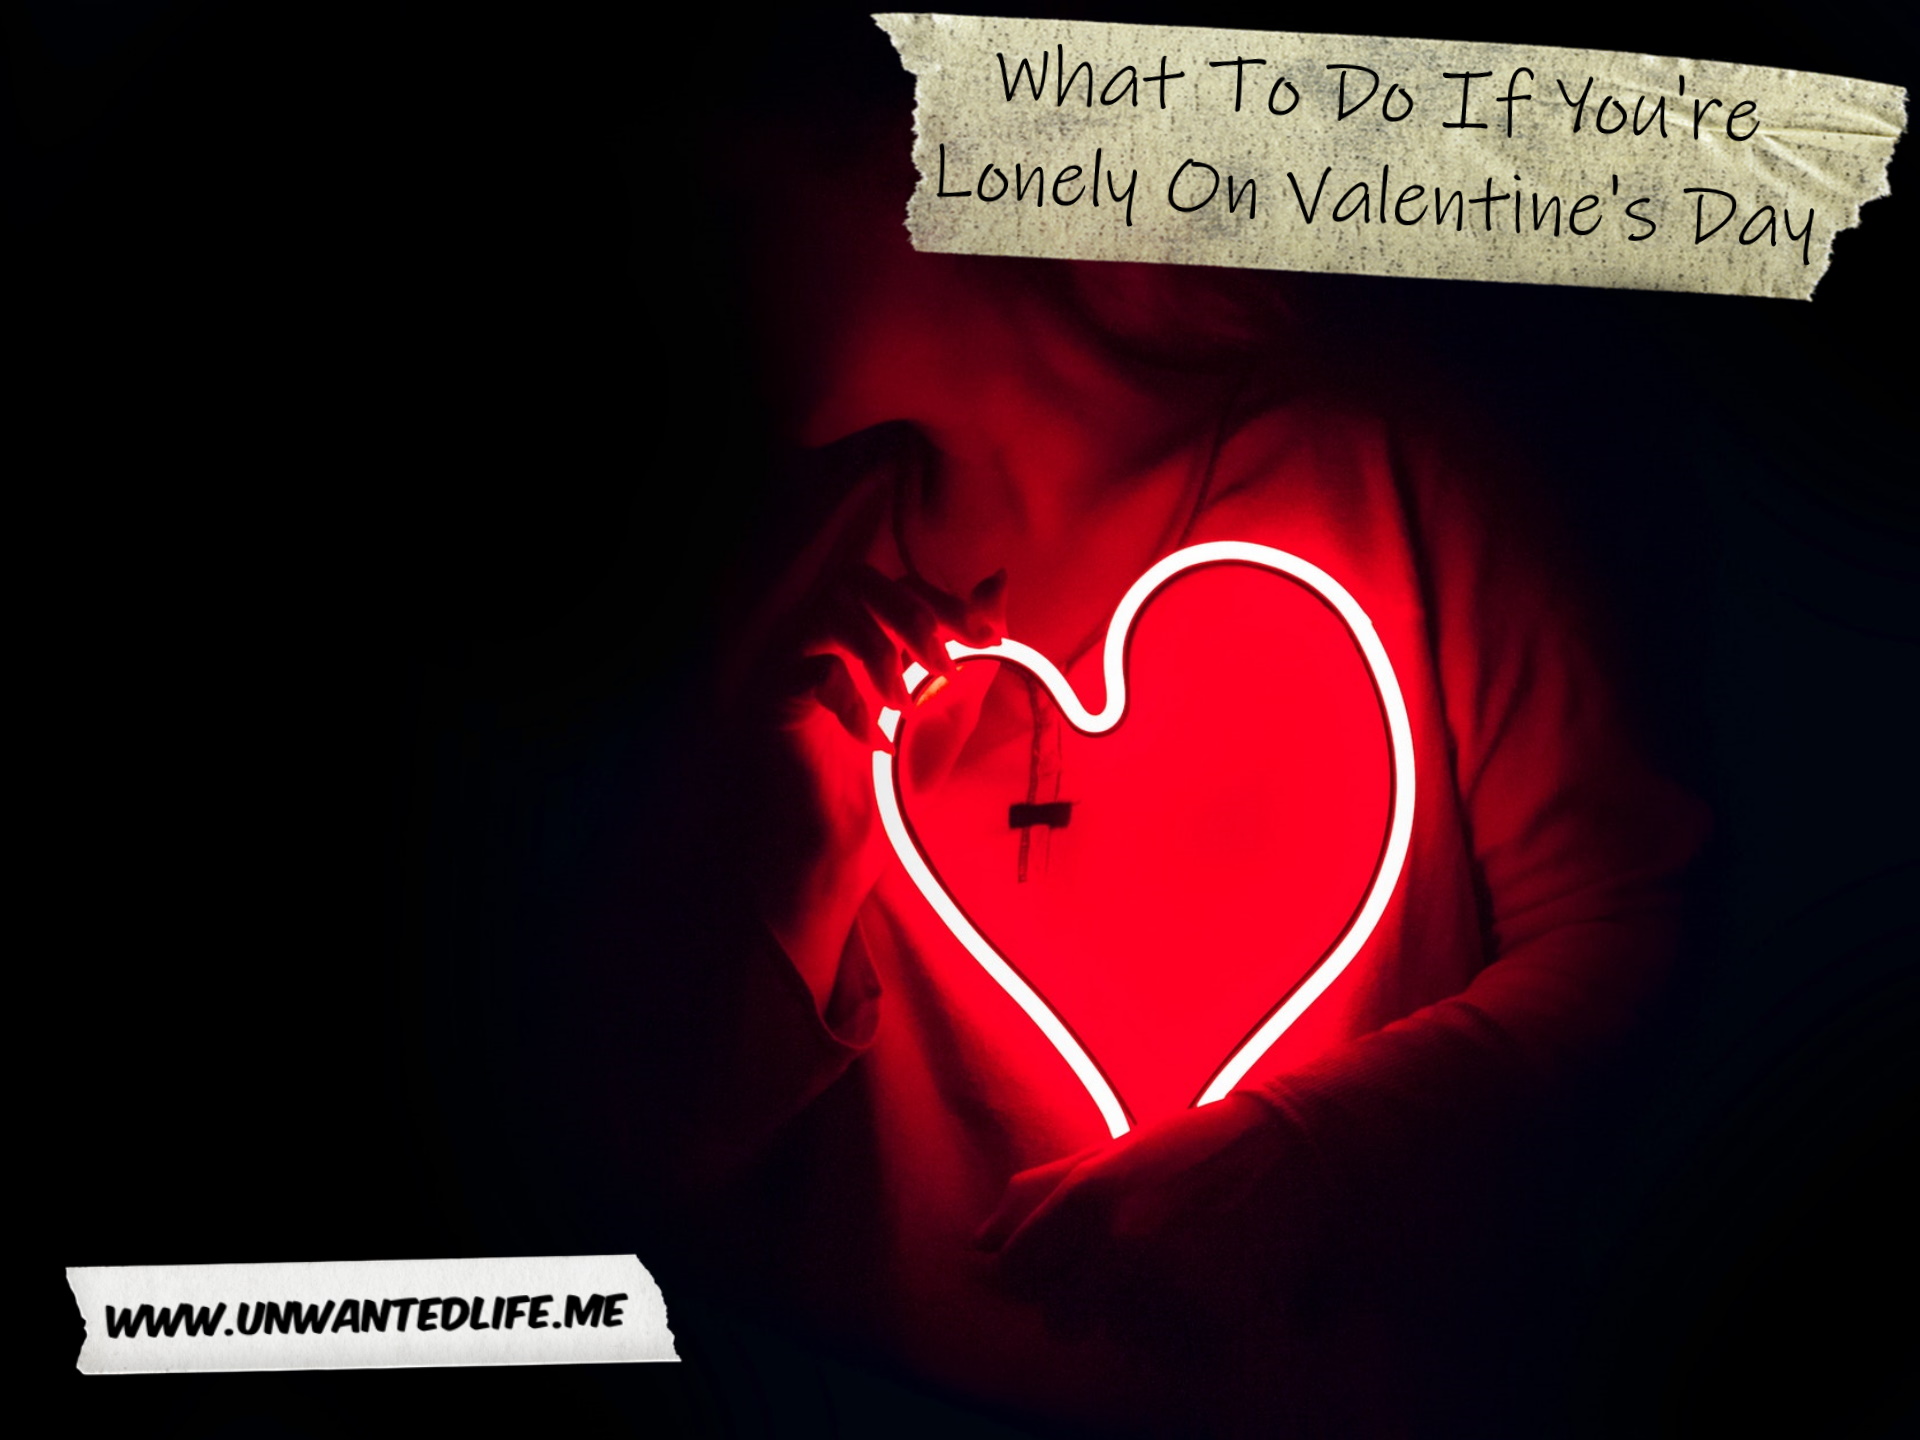 A photo of a woman in a black room being partially illuminated by a red light in the shape of a heart to represent the topic of the article - What To Do If You're Lonely On Valentine's Day